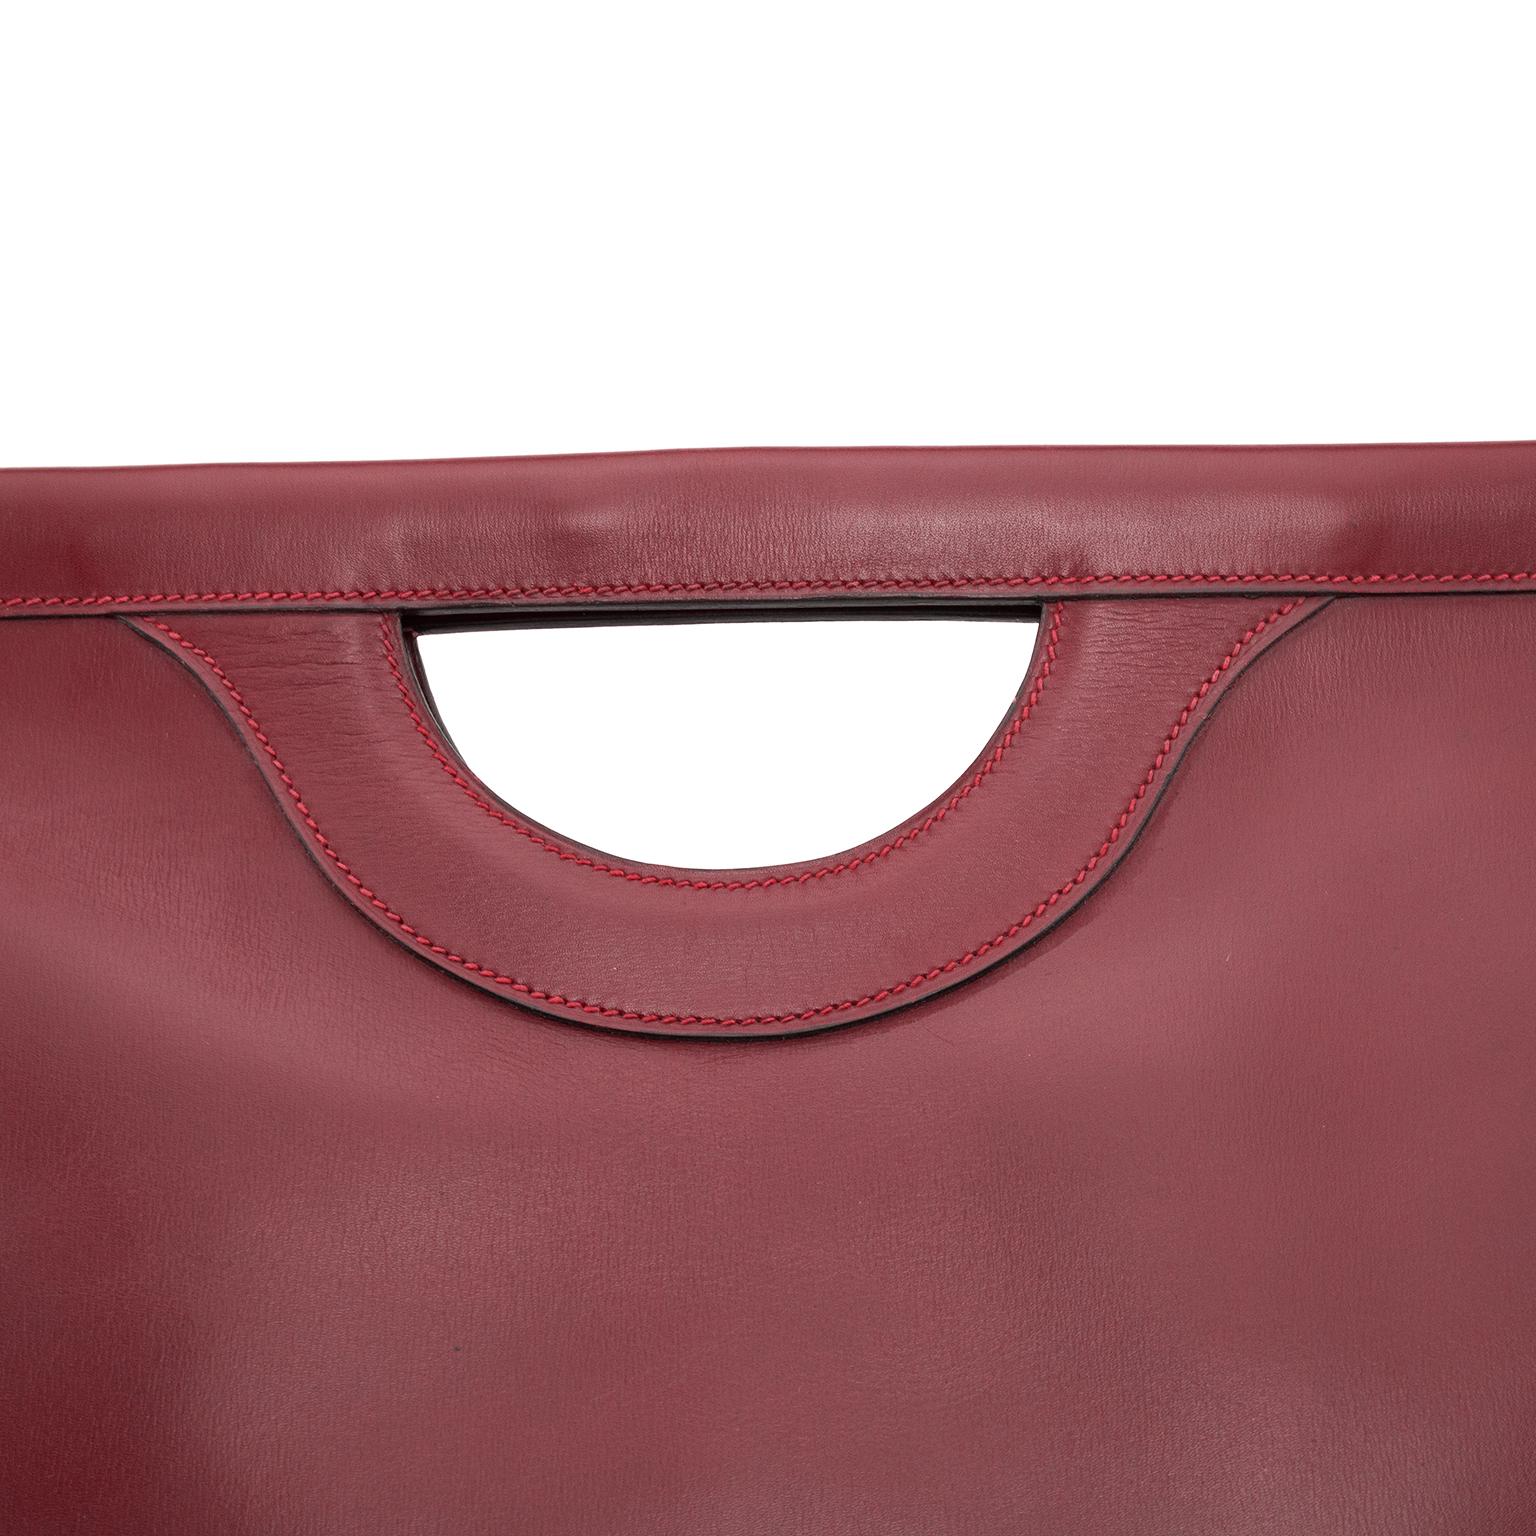 1979 Hermes Maroon Leather Cut Out Handle Shopper Tote For Sale 1